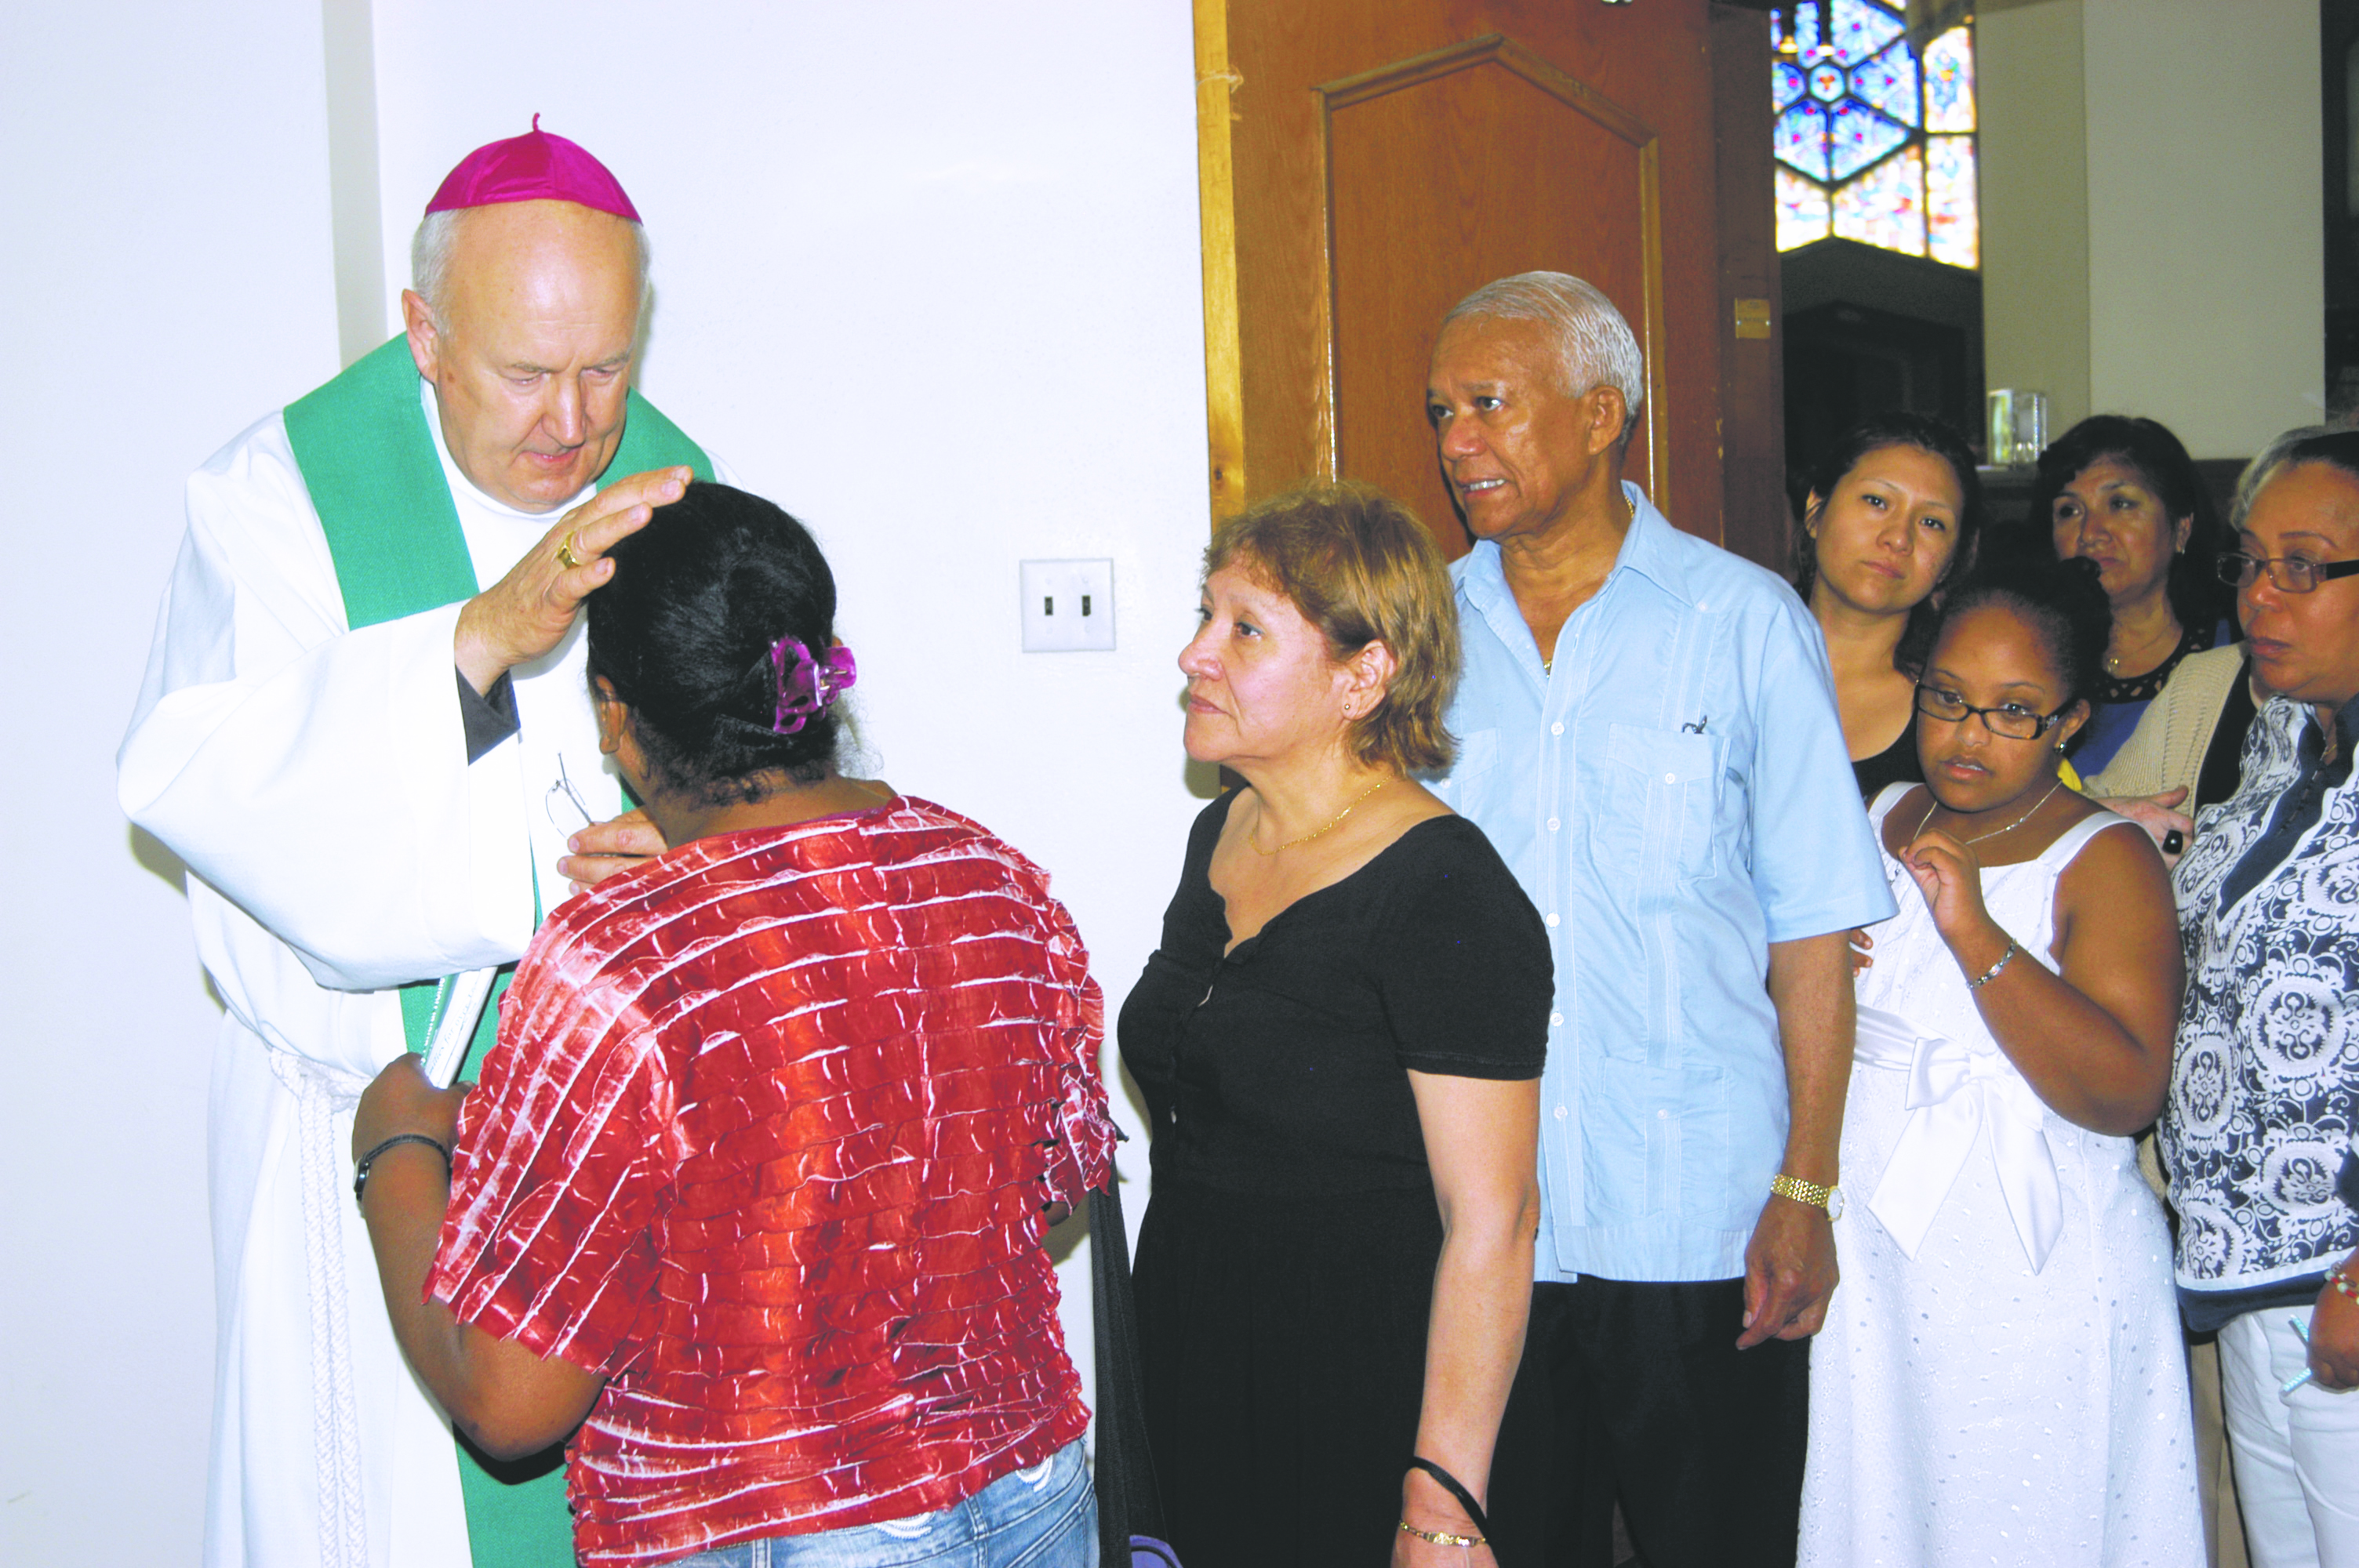 At St. Michael Church, Flushing, Msgr. Steenson greets and blesses former Episcopalians who are seeking full communion with the Catholic Church. Photo © Marie Elena Giossi